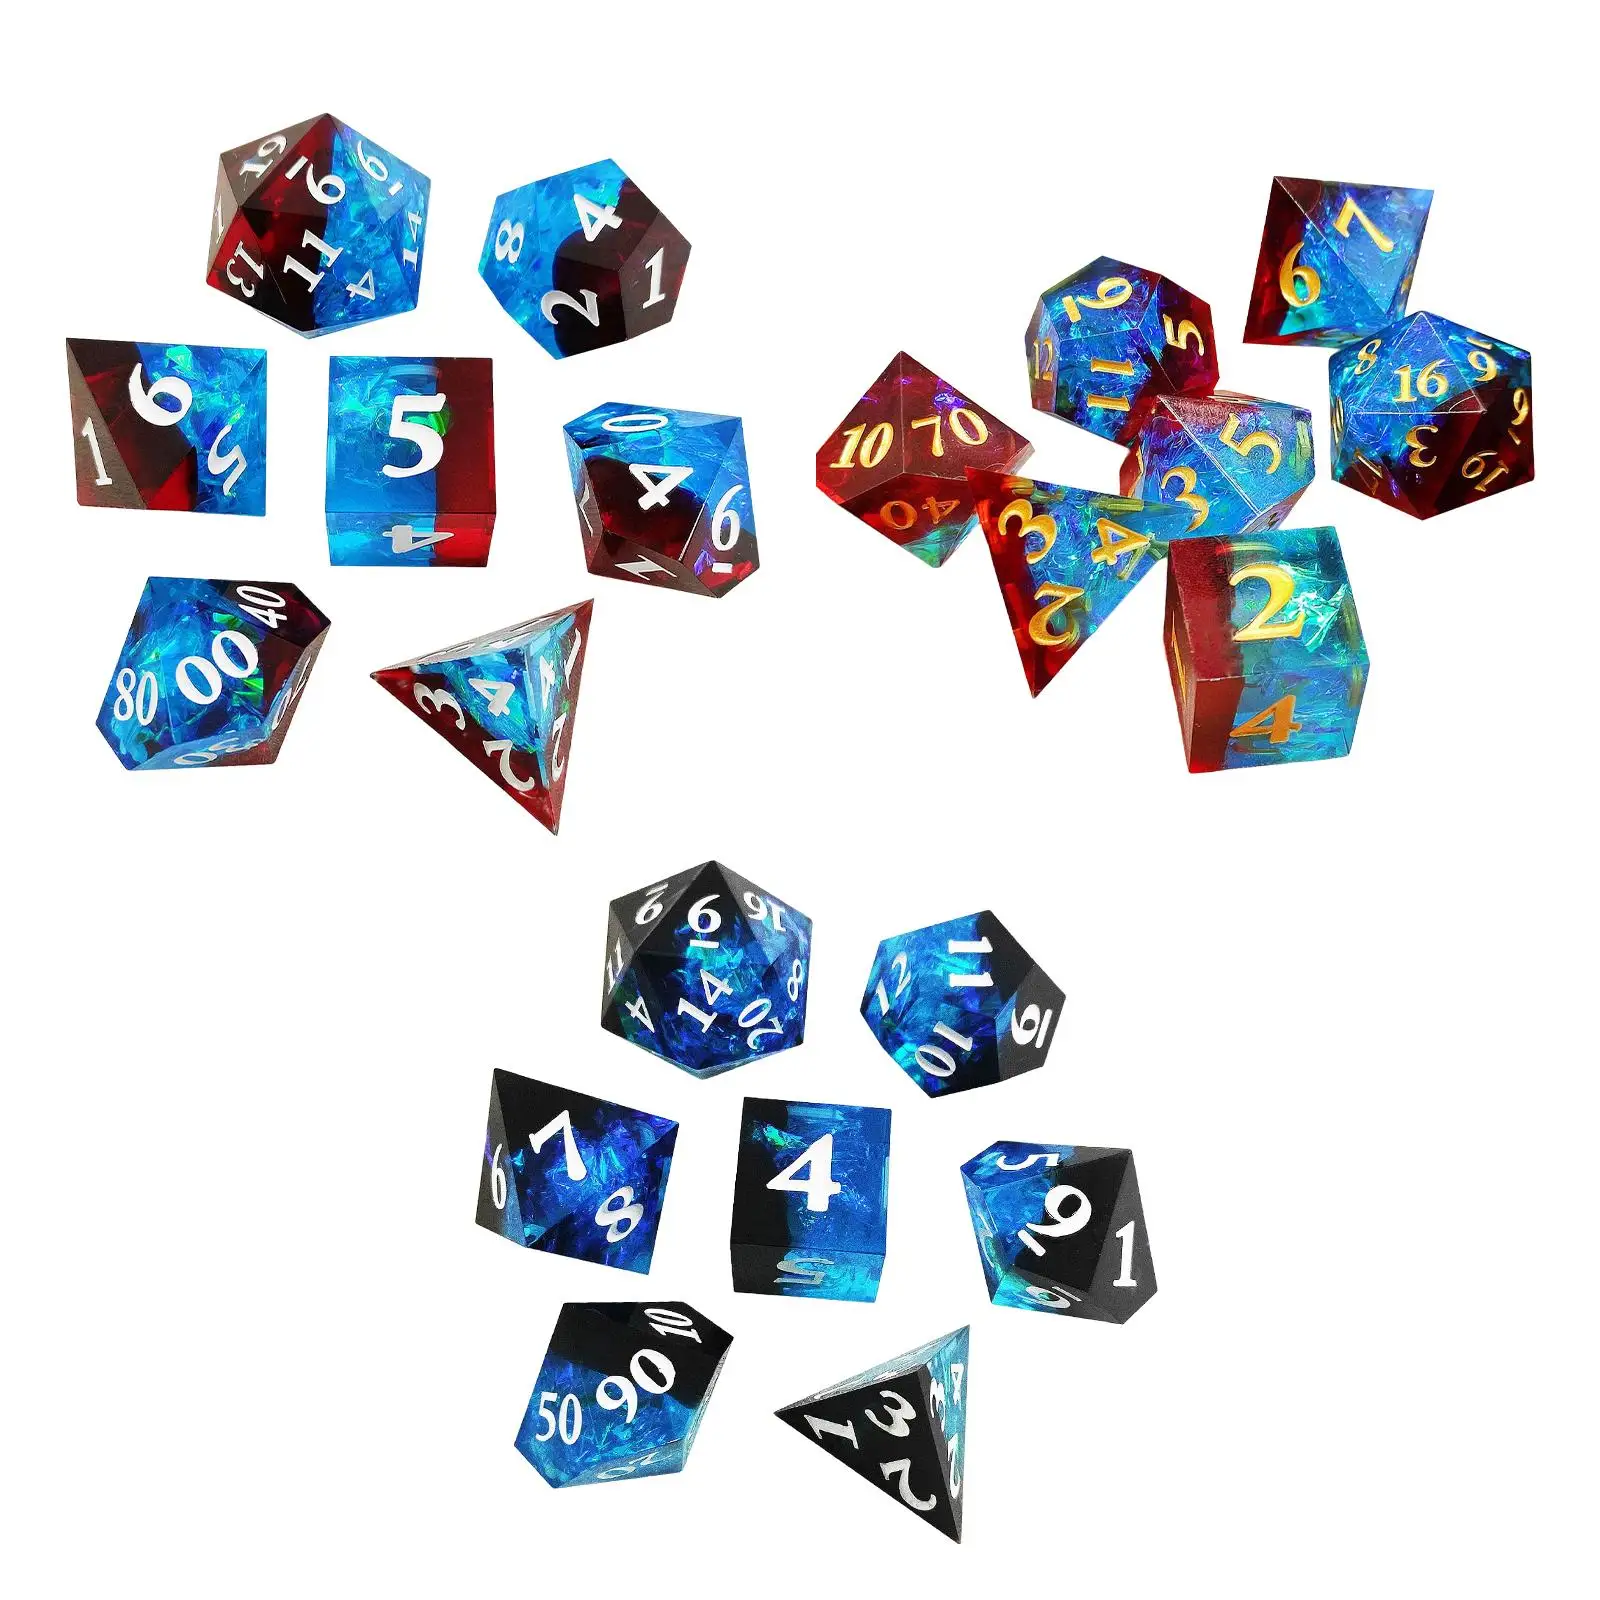 7 Pieces Resin Polyhedral Dice D4 D6 D8 D10 D12 D20 Party Game Dice Game Table Game for Party Cafe Family Gathering Bar